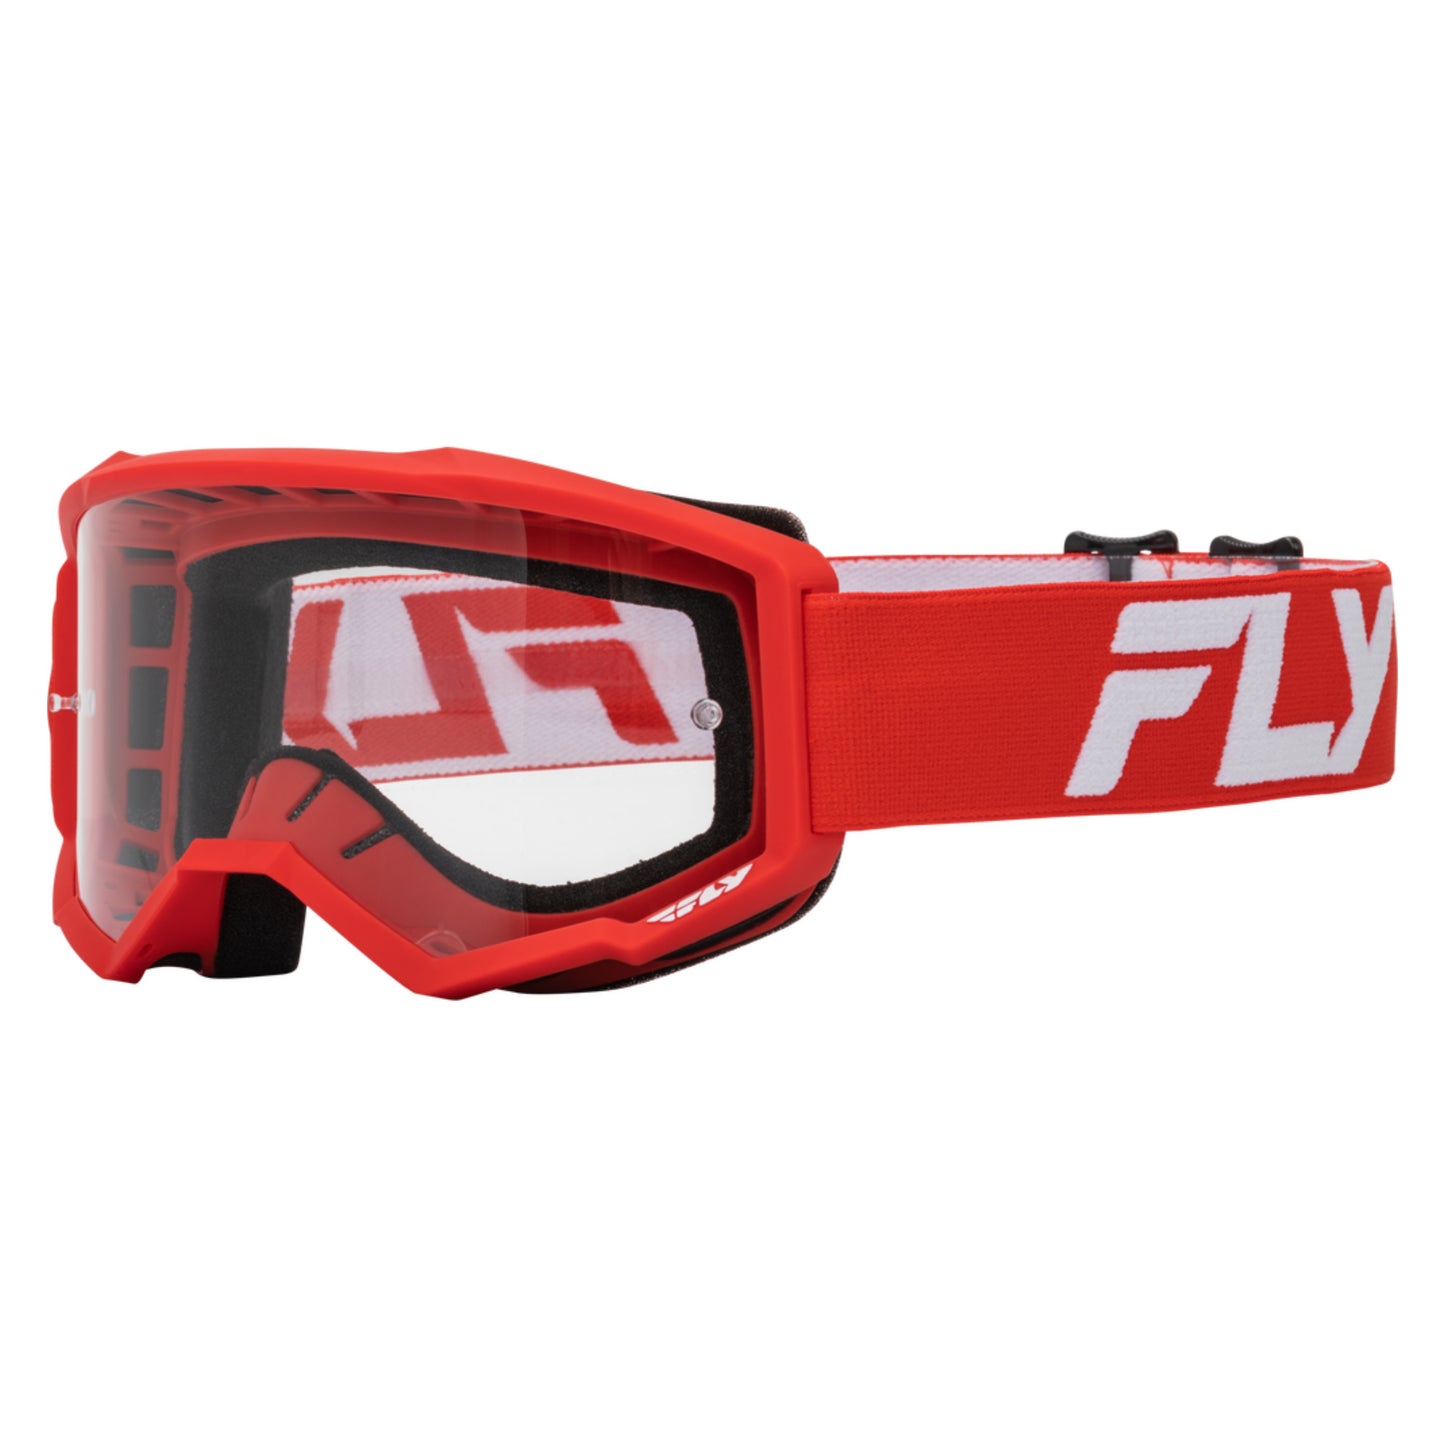 FLY Focus Goggles - Clear Lens